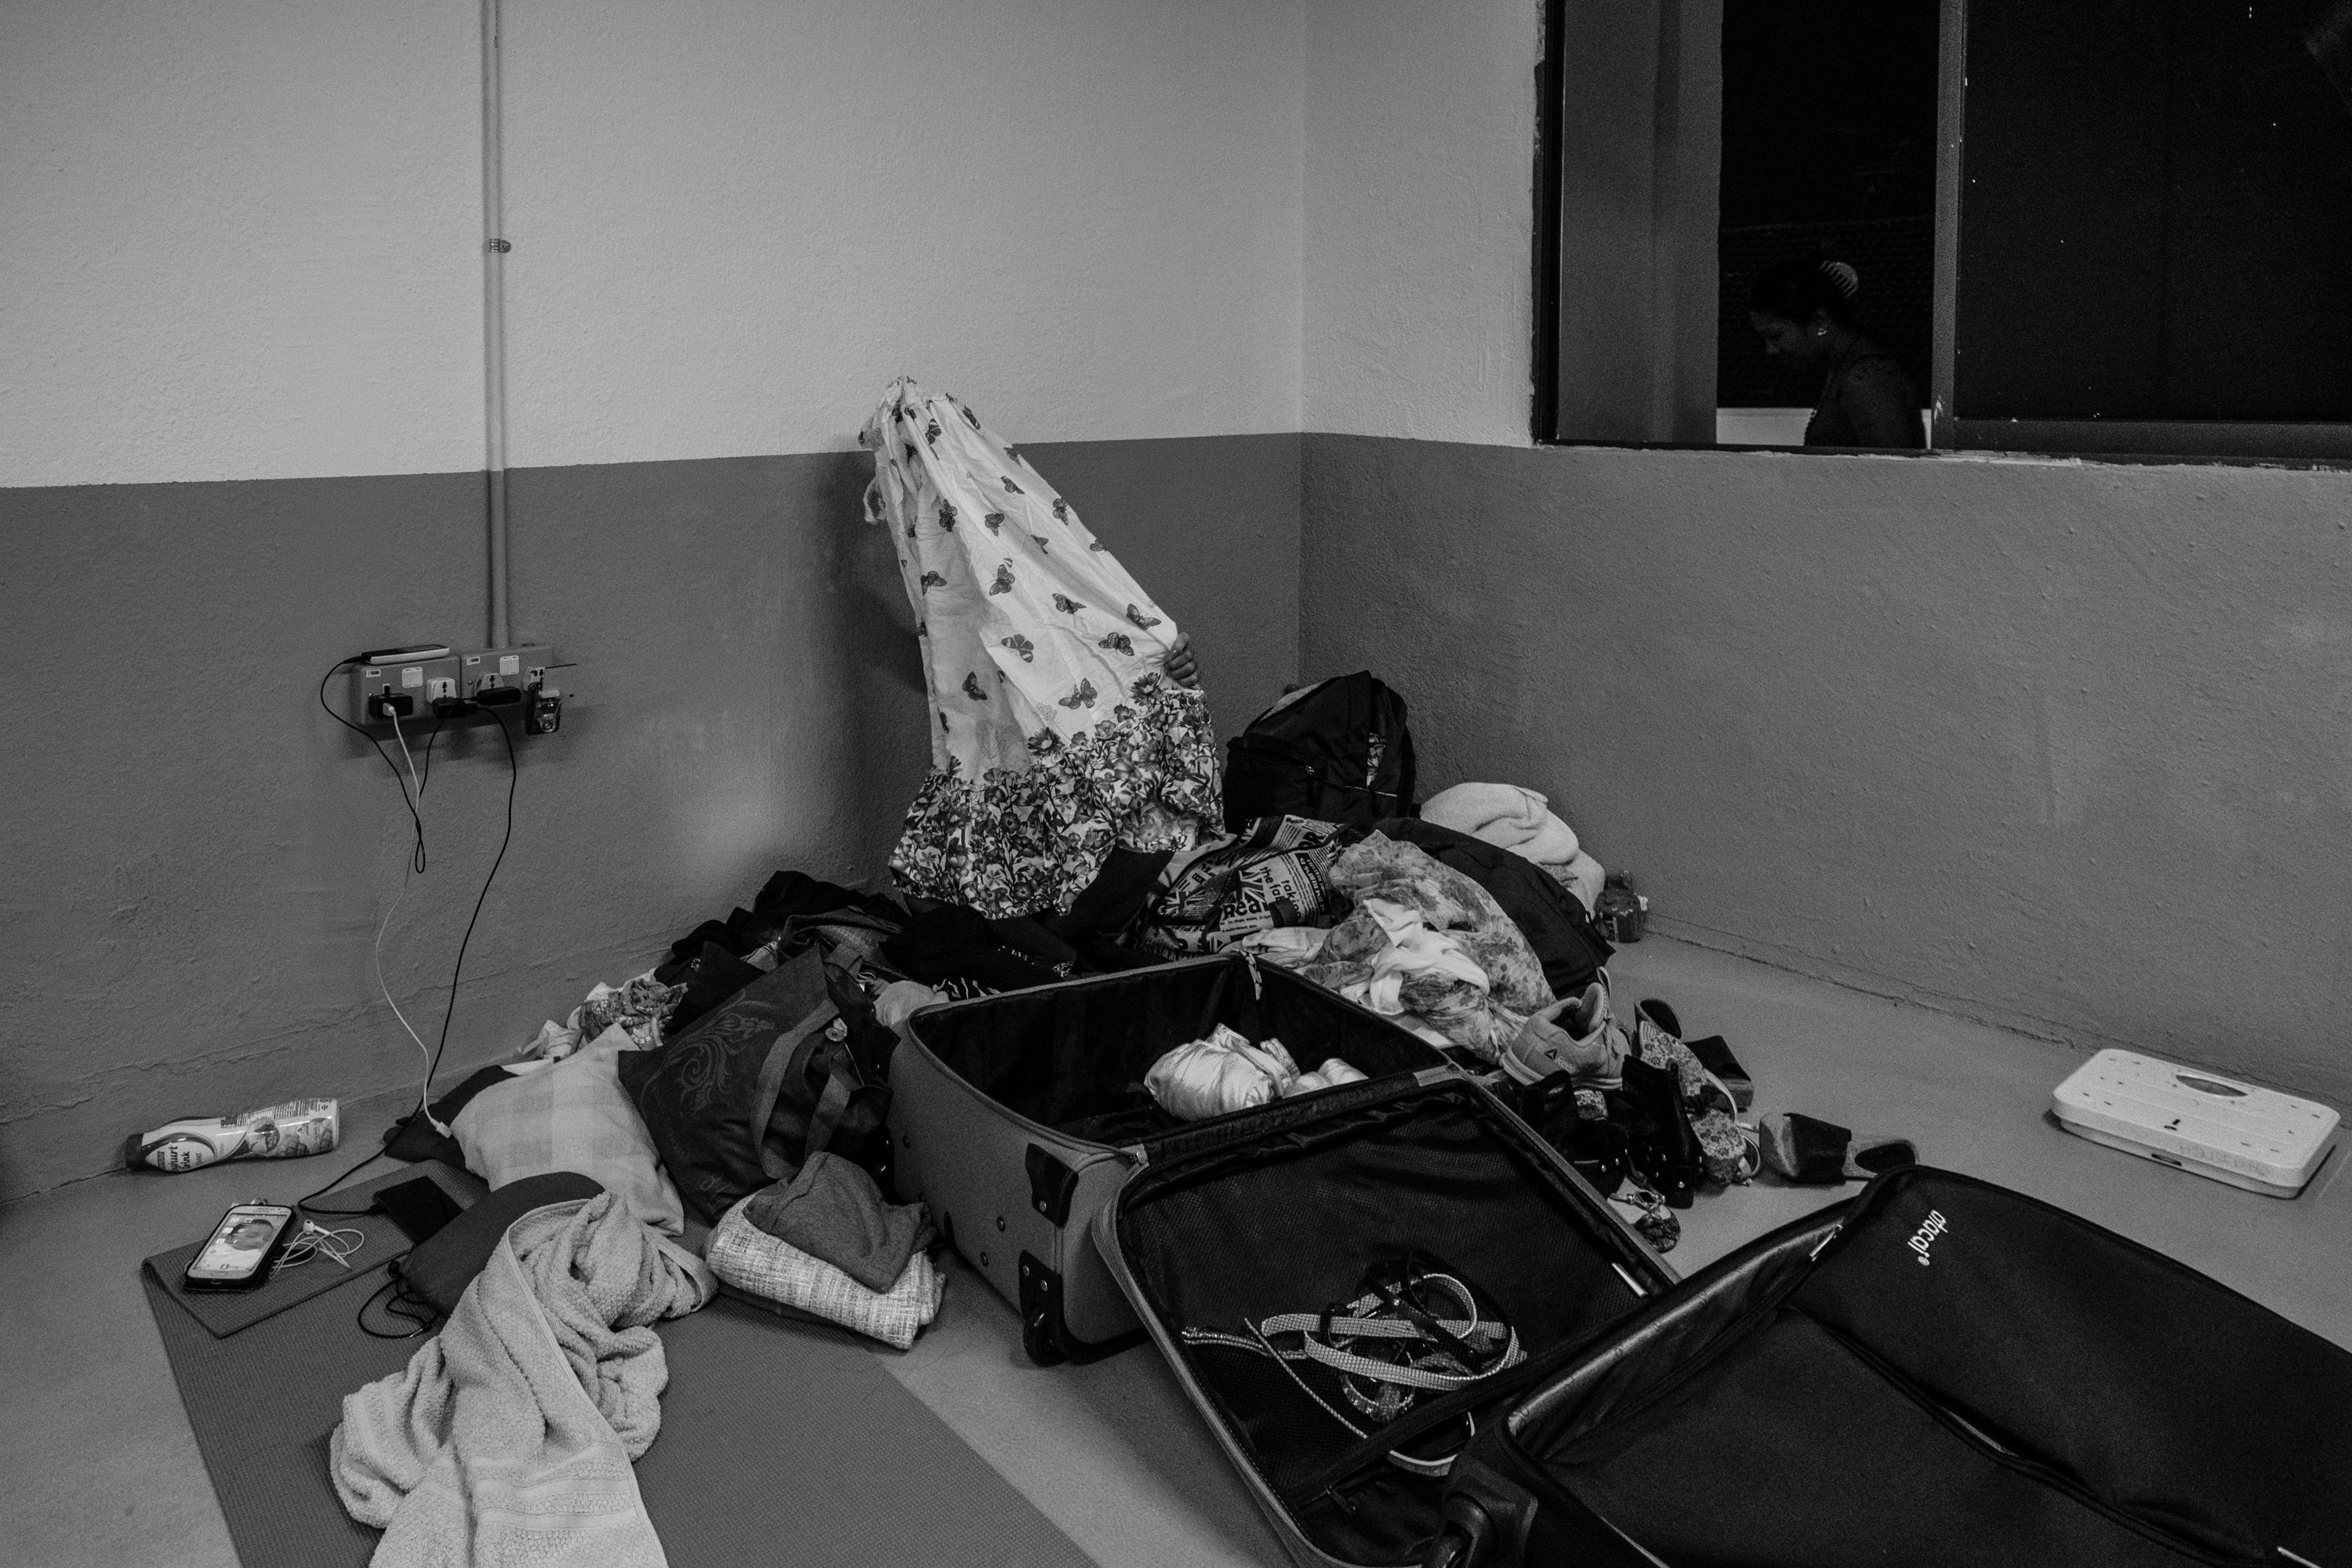 A runaway domestic worker packed her bags inside the shelter. She is finally returning home after months of waiting. Image by Xyza Bacani. Singapore, 2016.